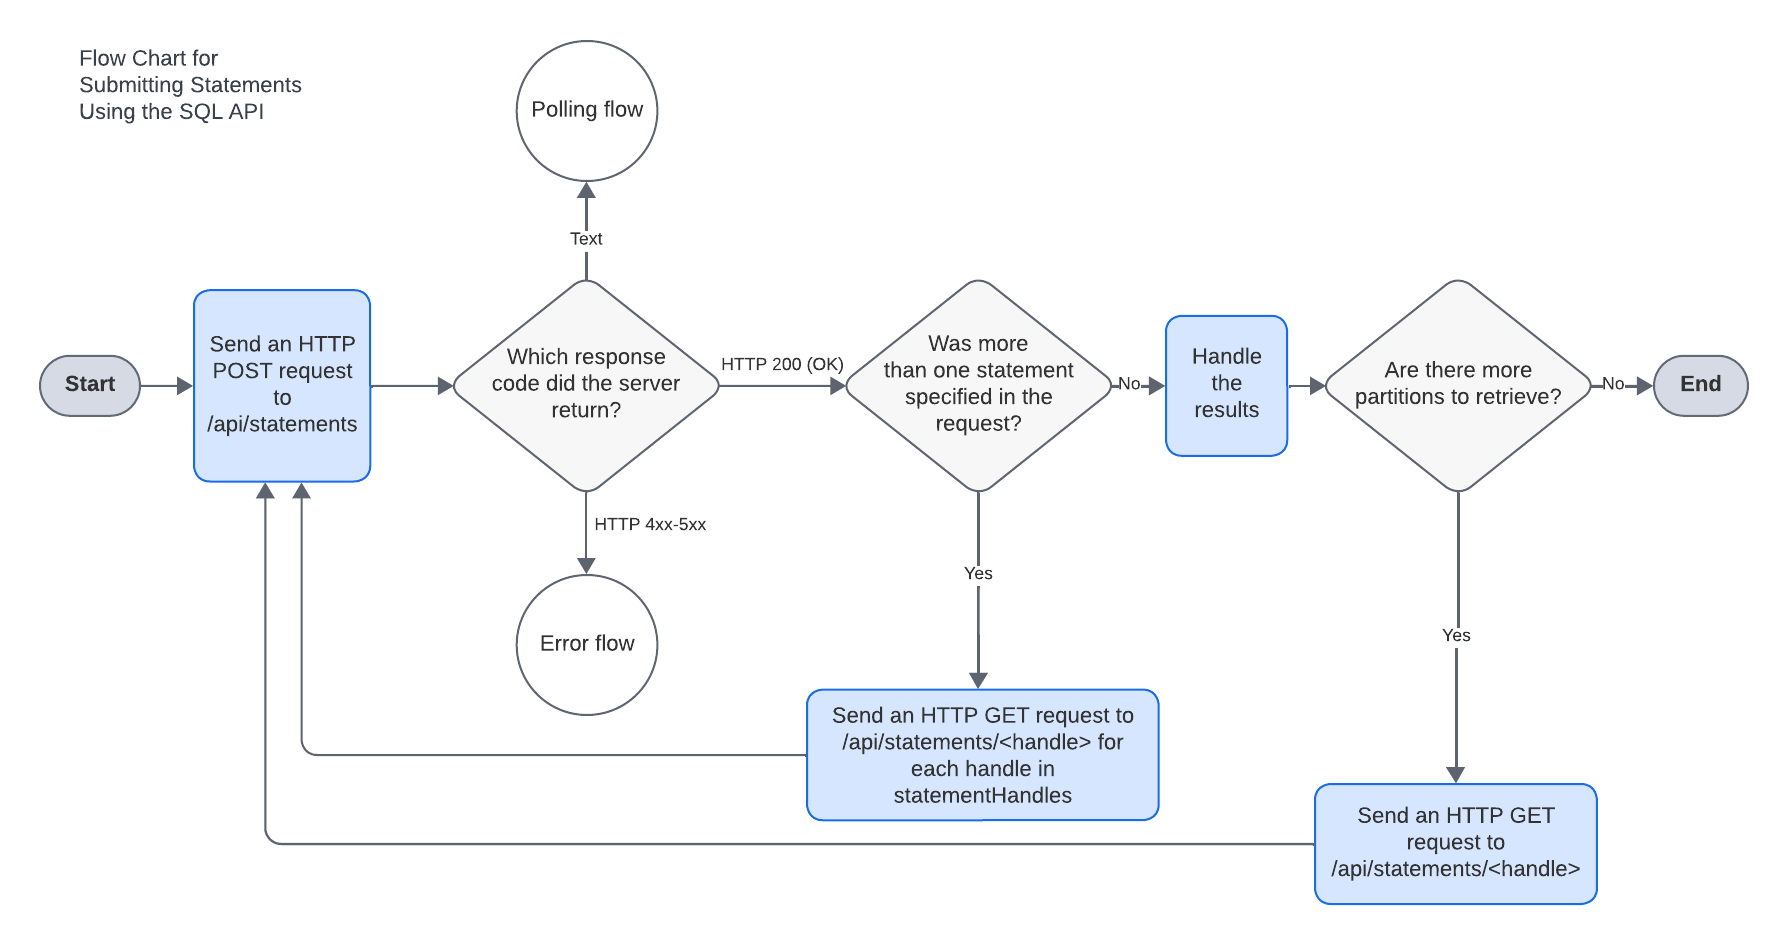 Flow chart for submitting a statement for execution